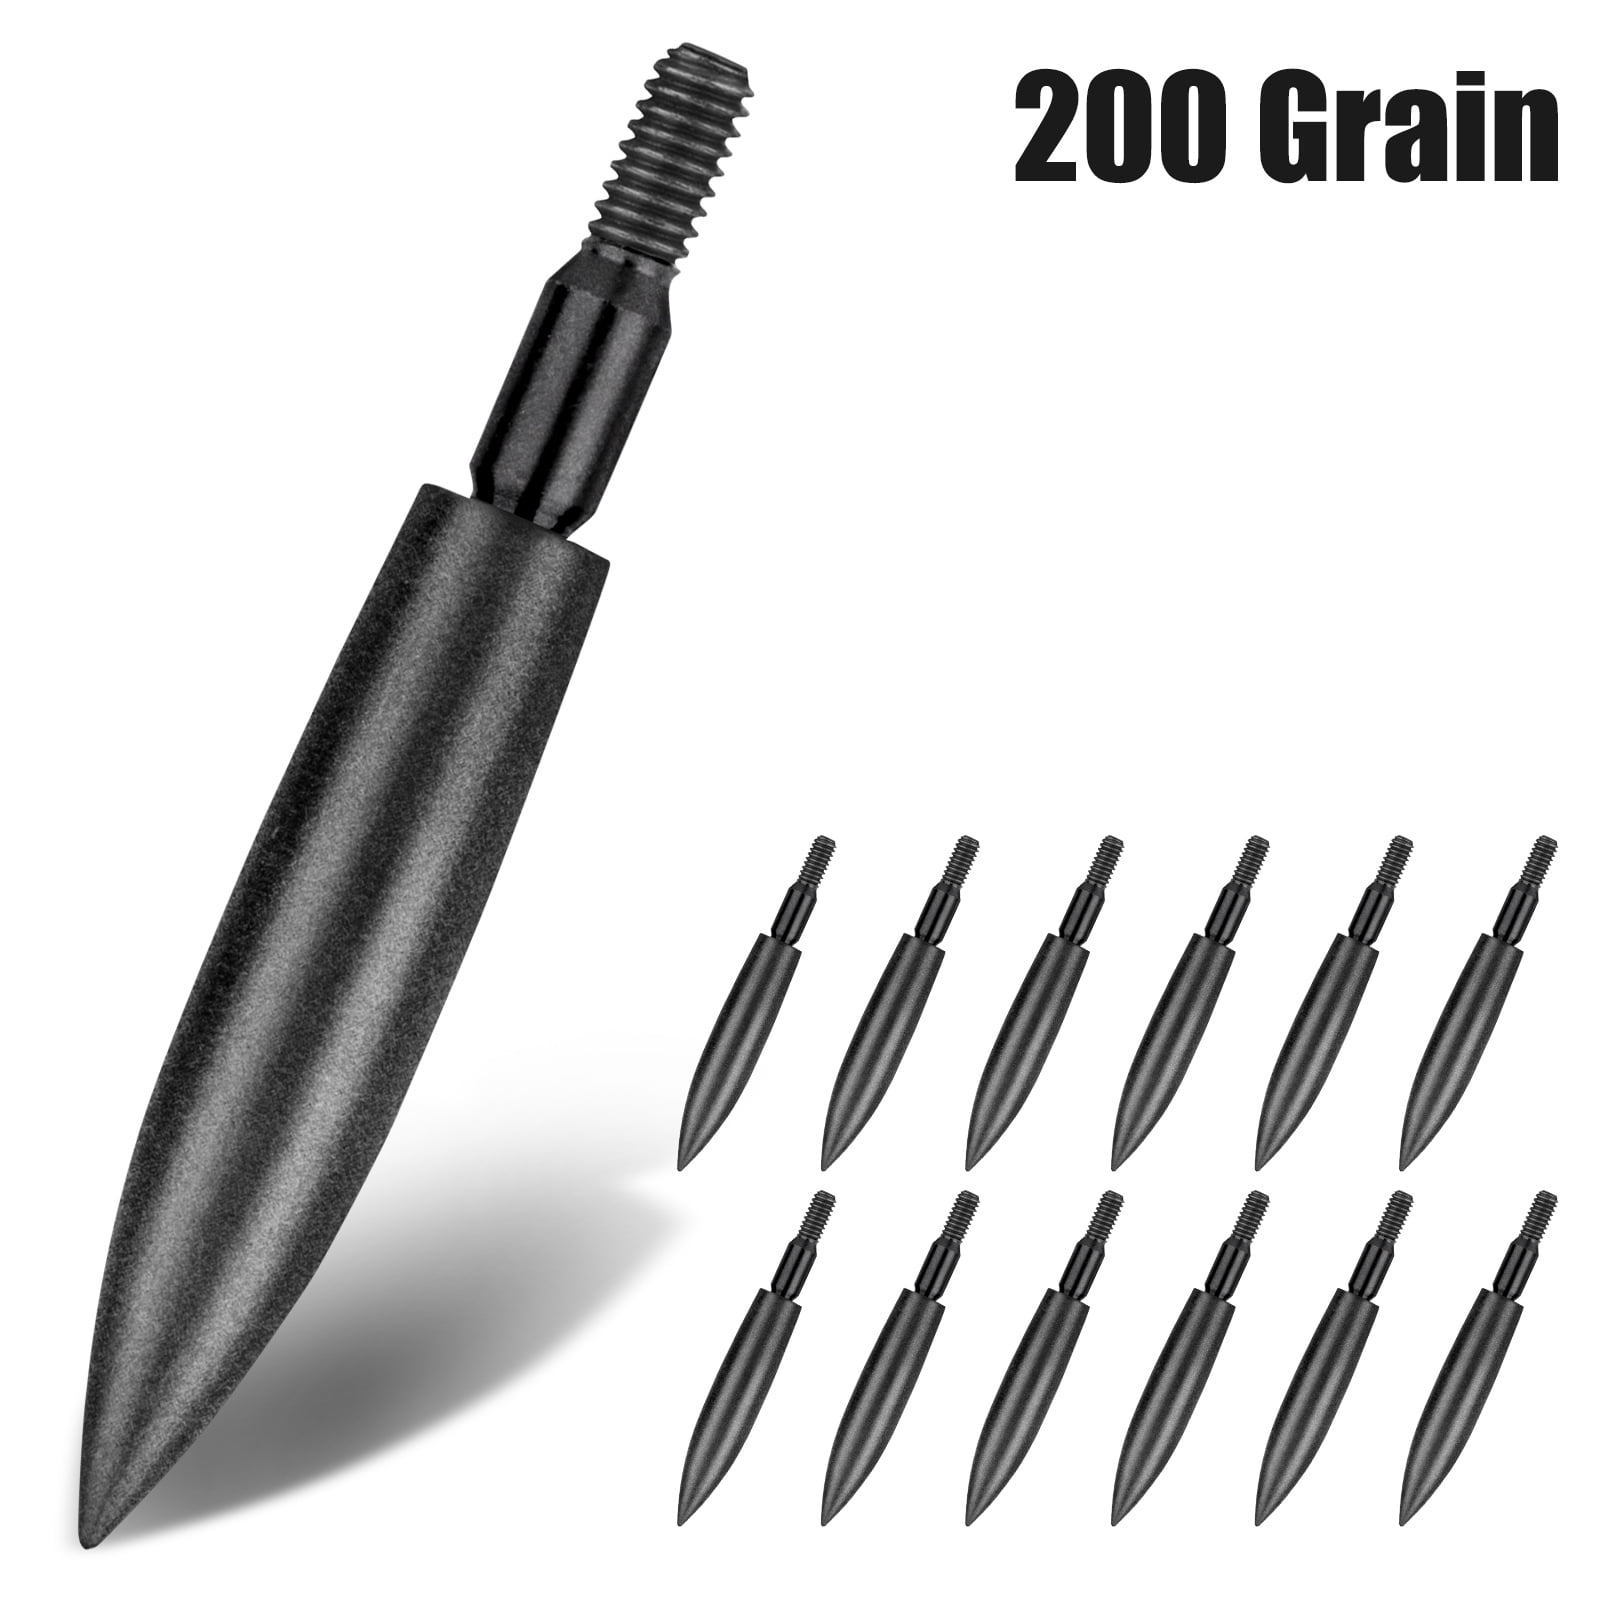 150Grain Archery Field Points Target Practice Broadheads for Bow Hunting 12 pack